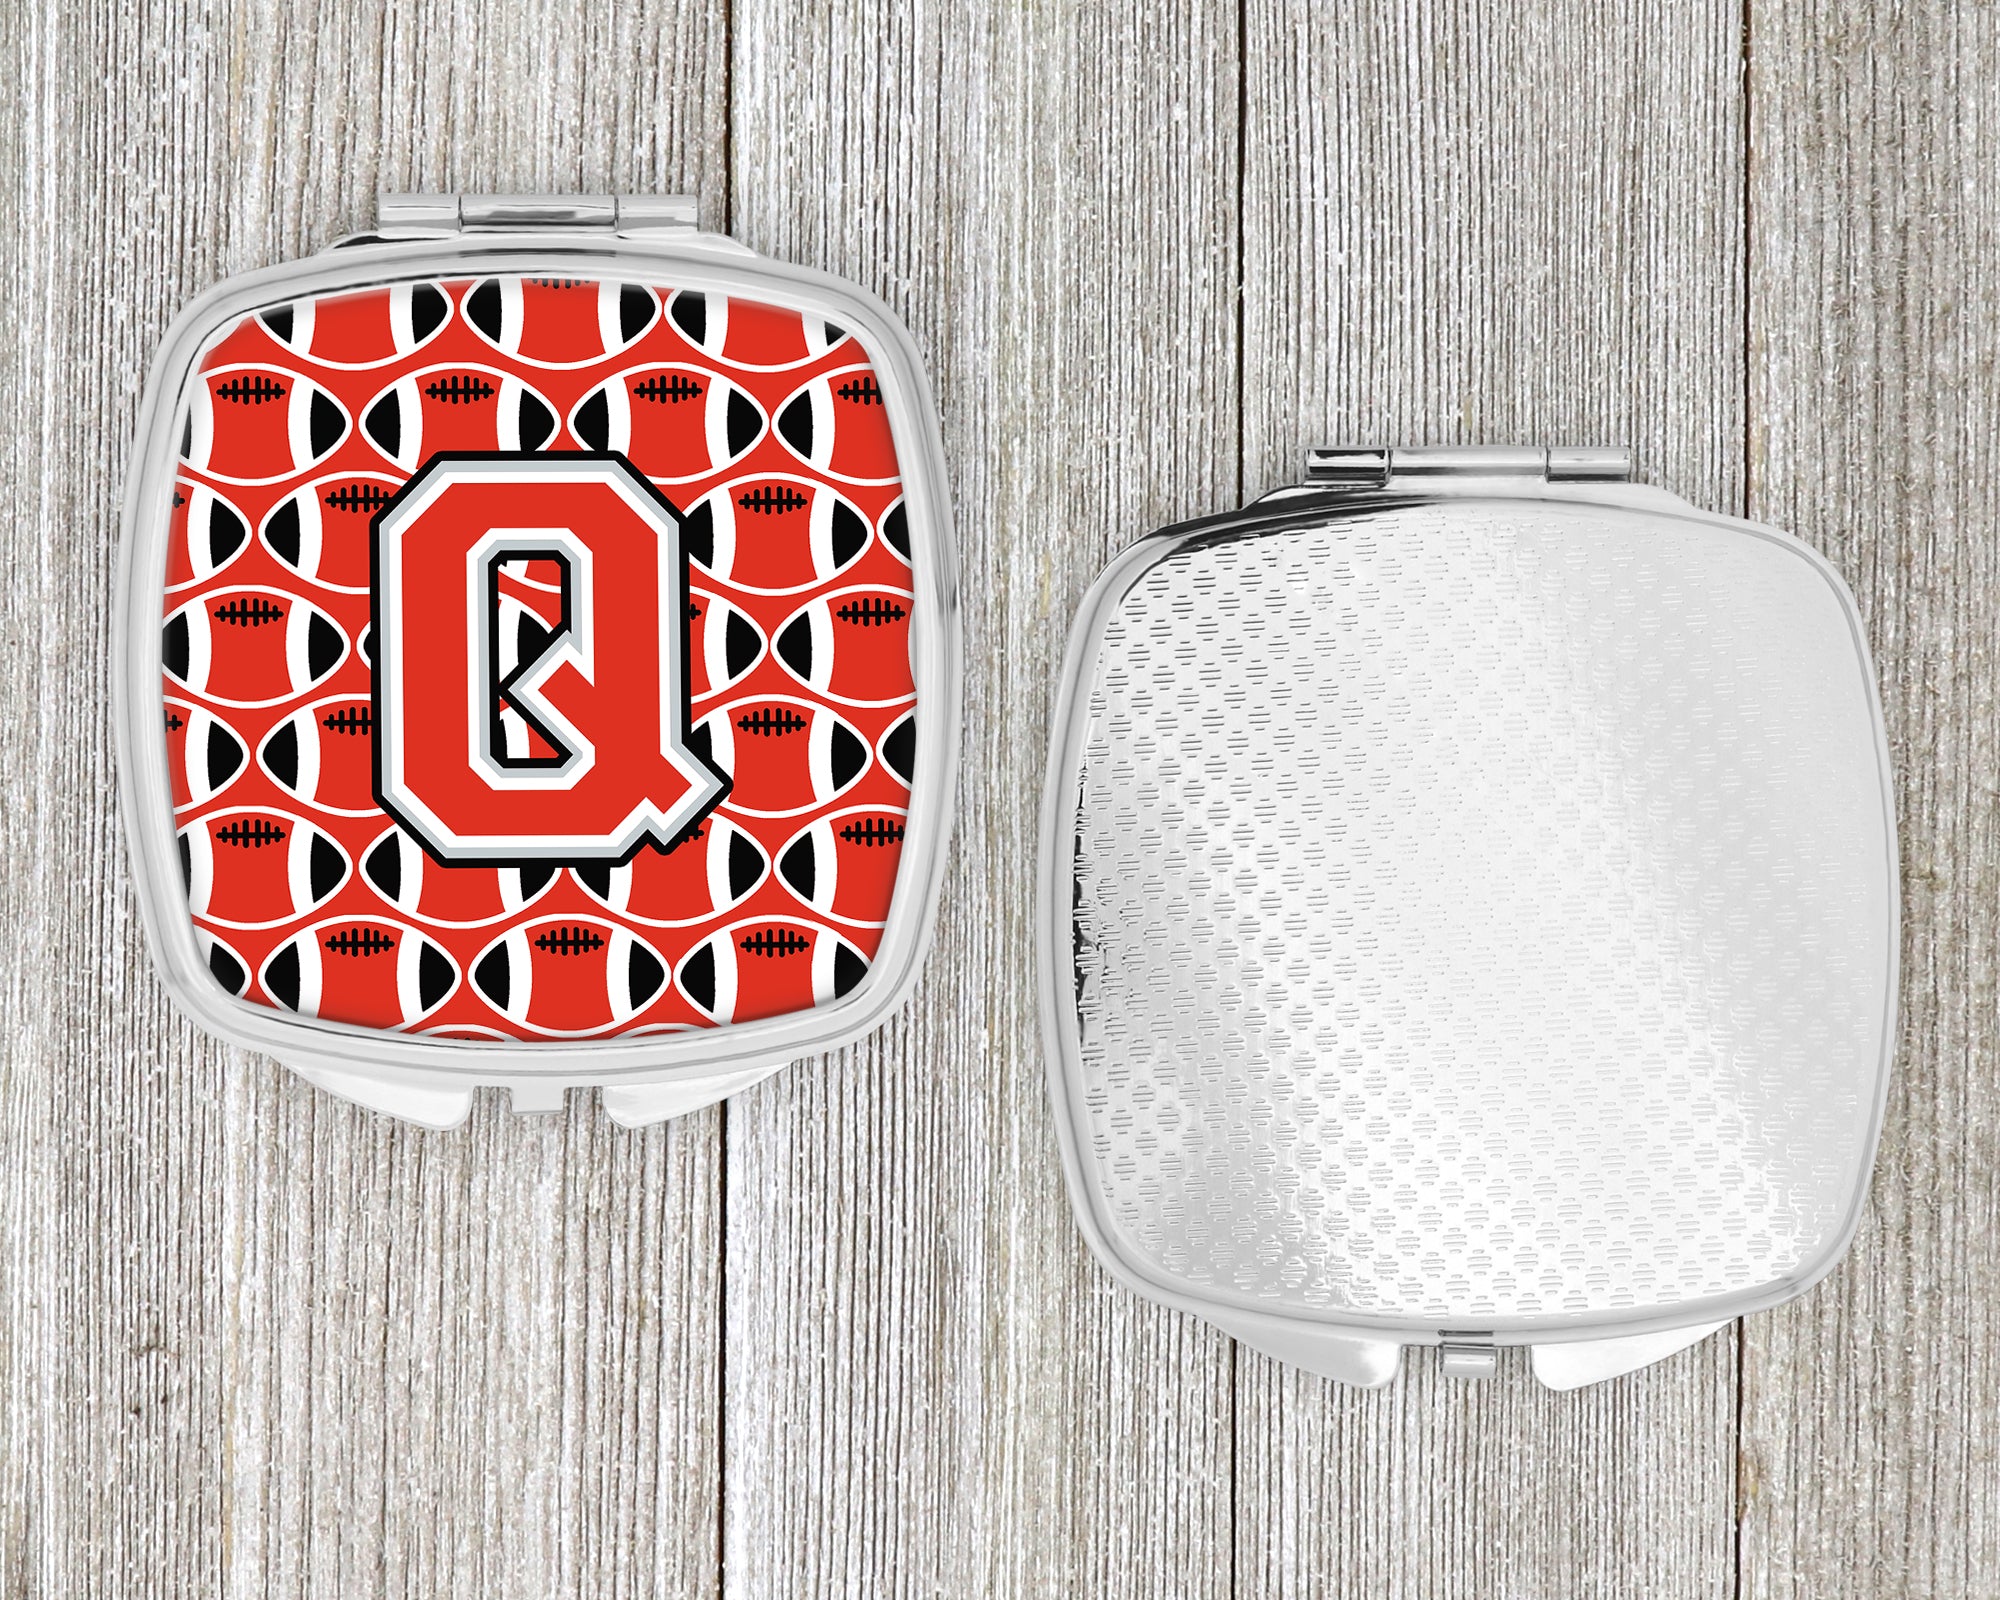 Letter Q Football Scarlet and Grey Compact Mirror CJ1067-QSCM